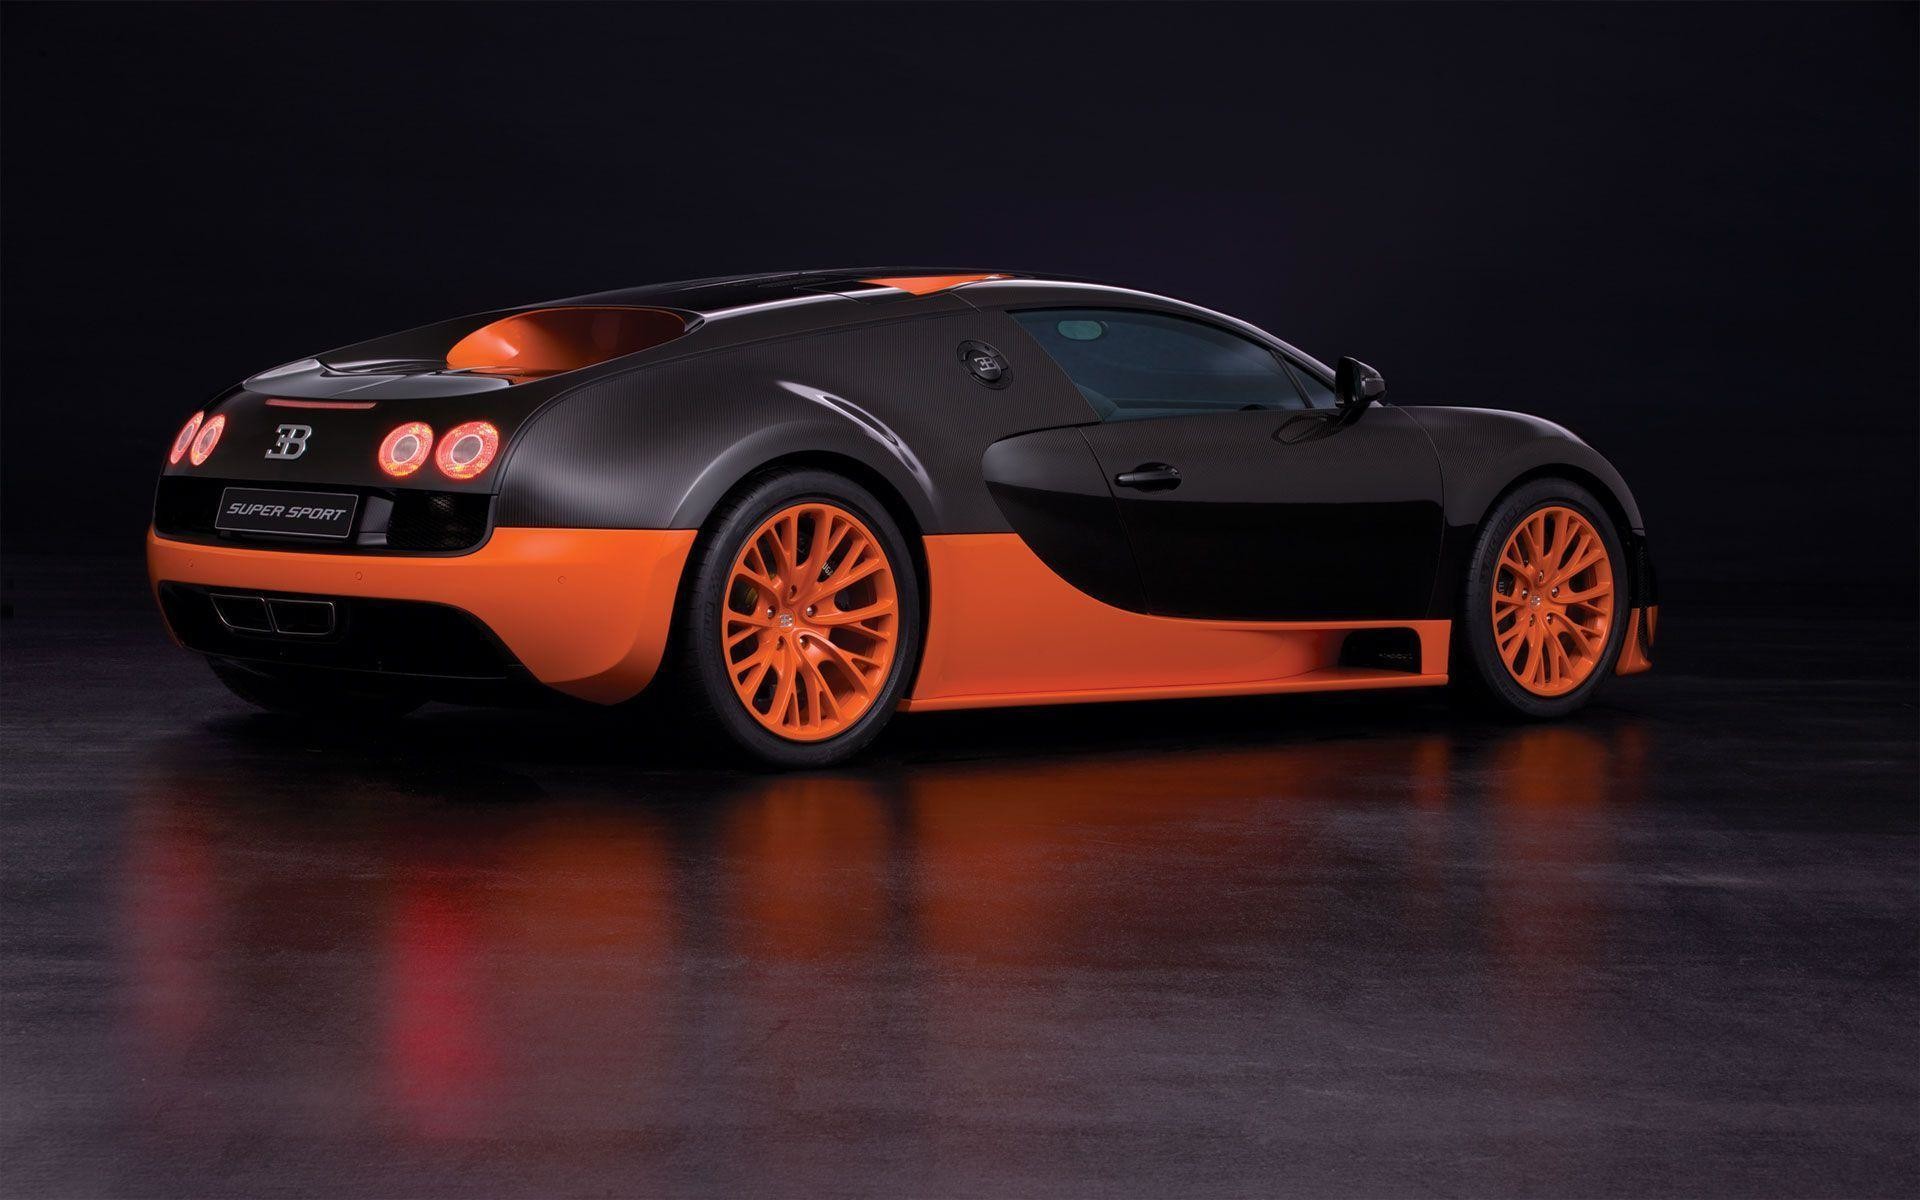 1920x1200 Most Downloaded Bugatti Veyron Wallpapers - Full HD wallpaper search